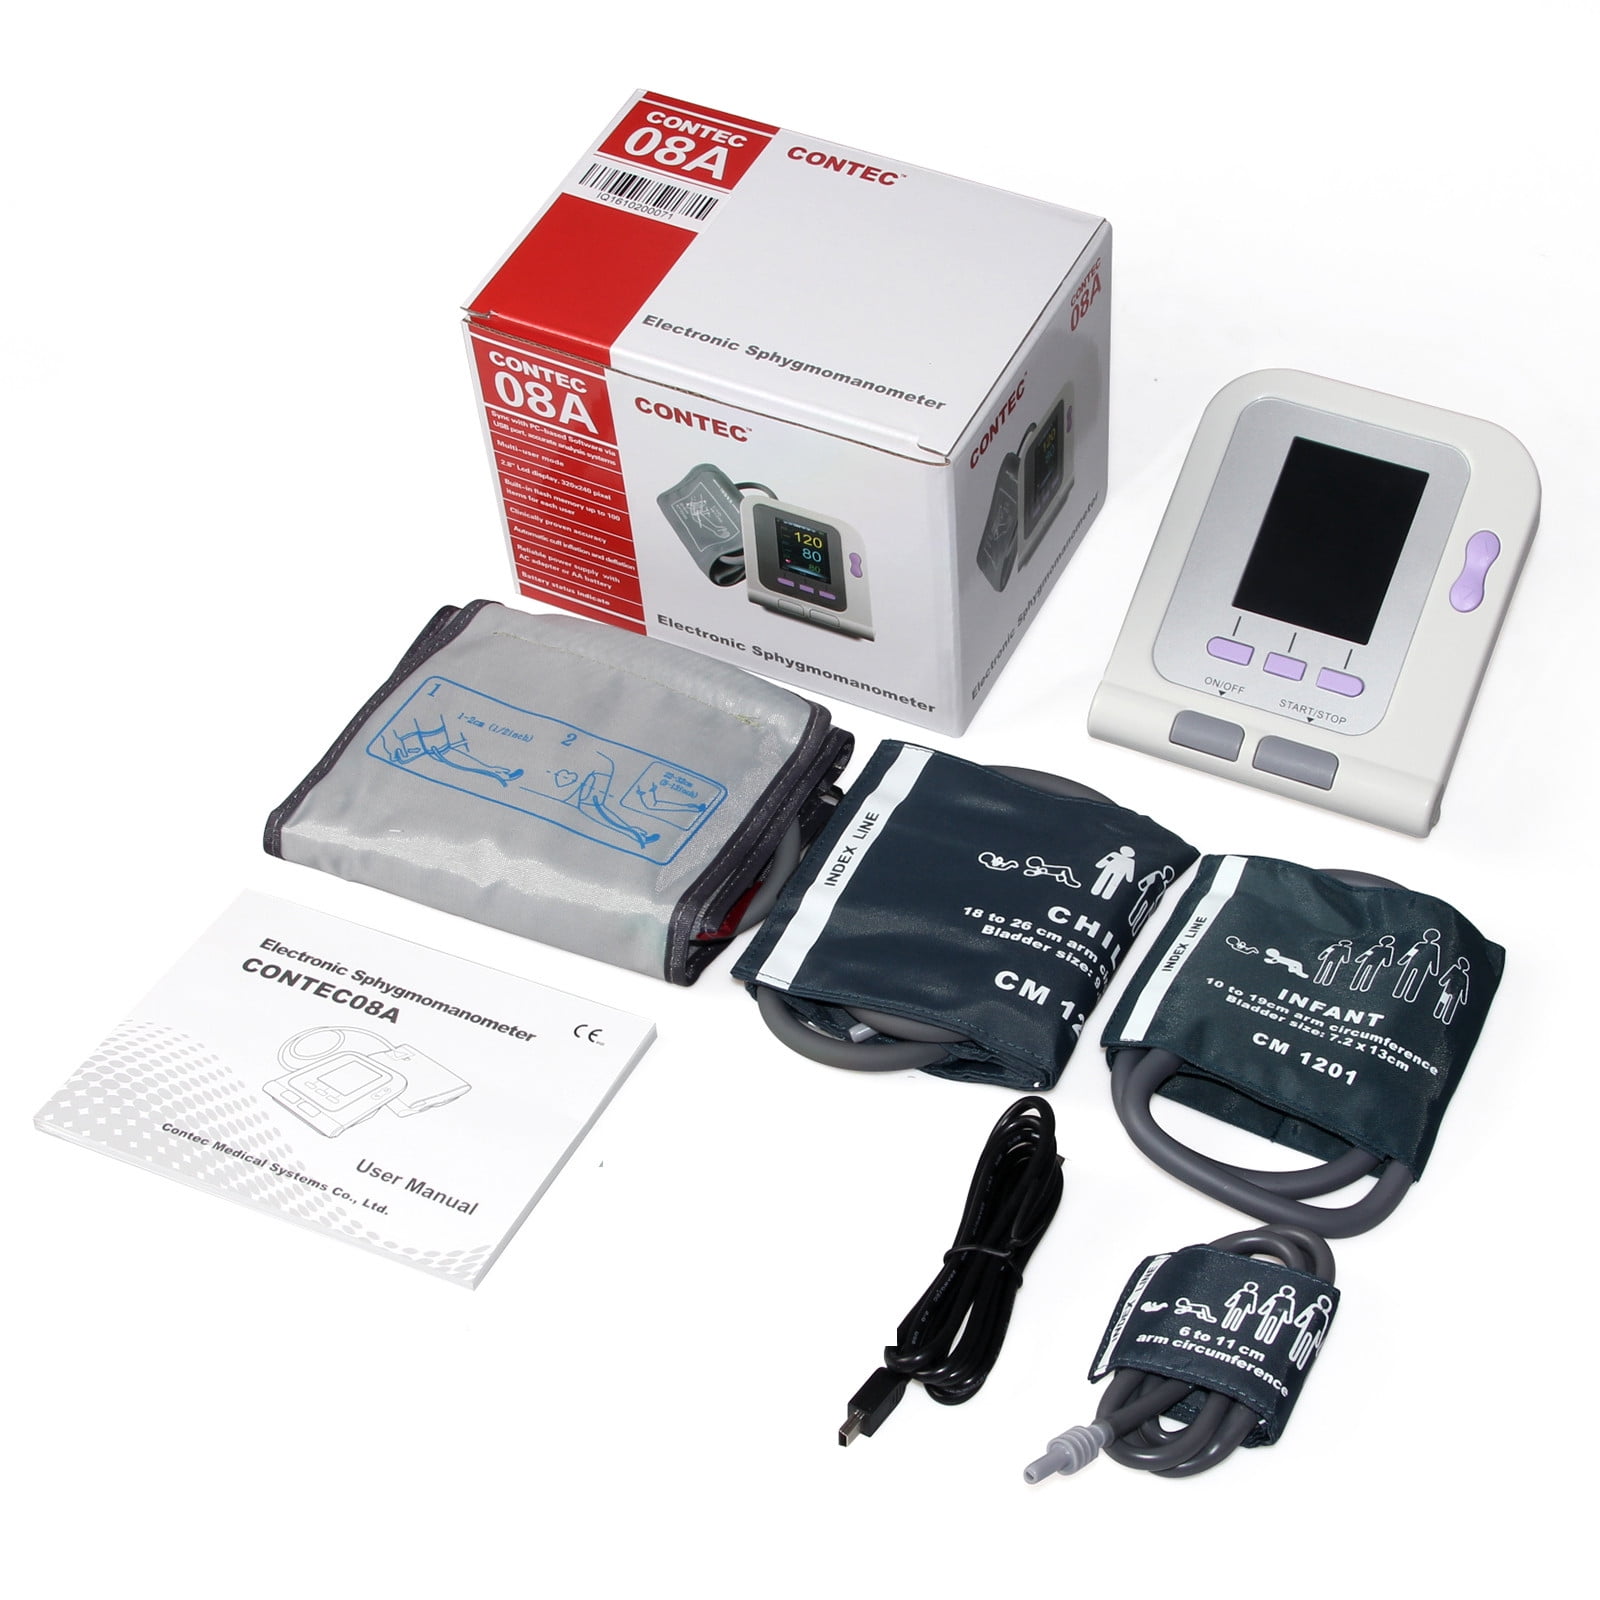 pediatric automatic blood pressure monitor from